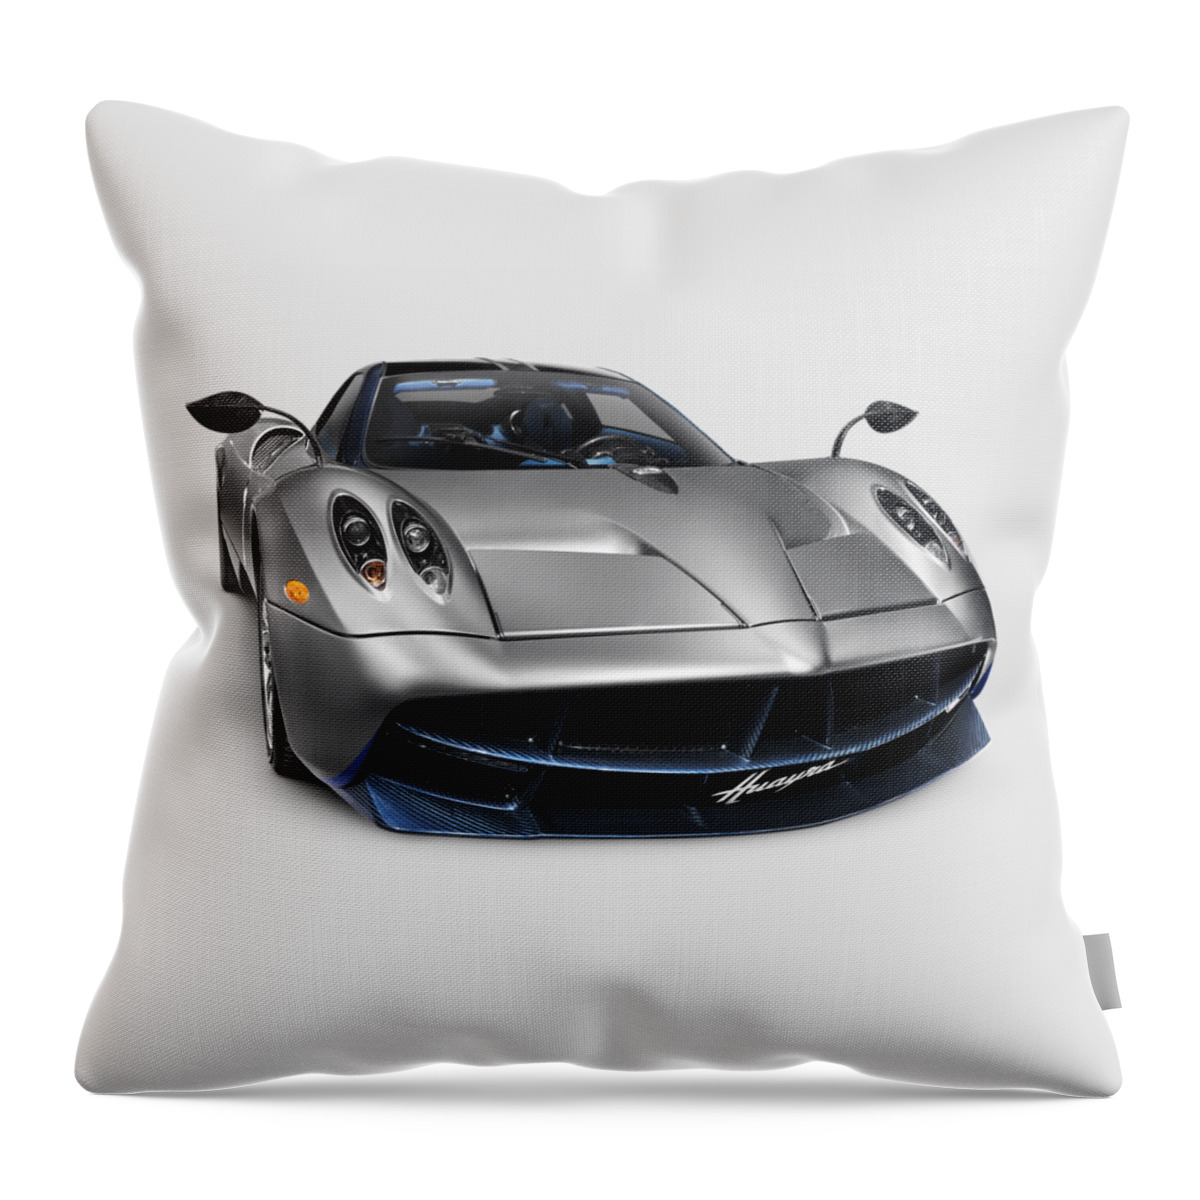 Pagani Throw Pillow featuring the photograph Pagani Huayra exotic sports car by Maxim Images Exquisite Prints